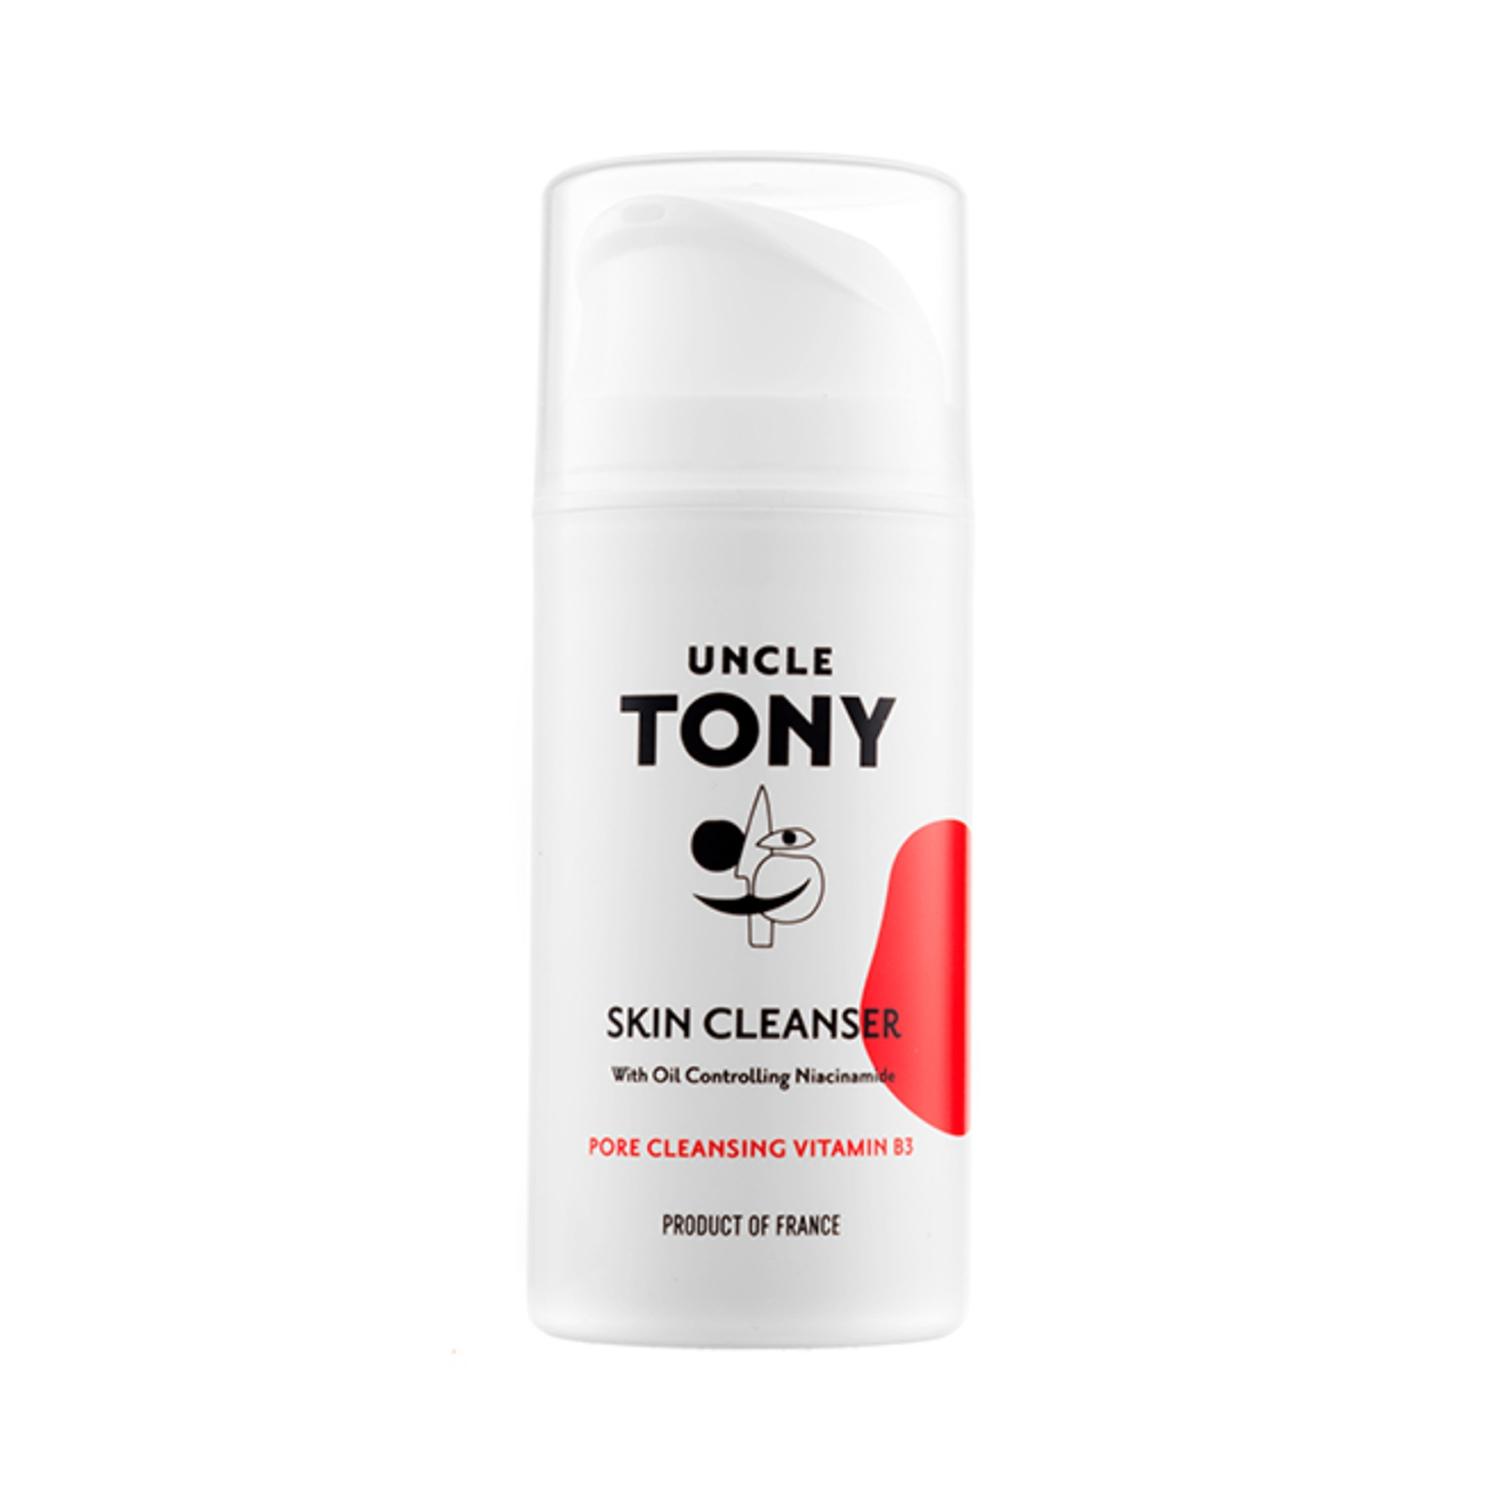 uncle tony skin cleanser (100ml)